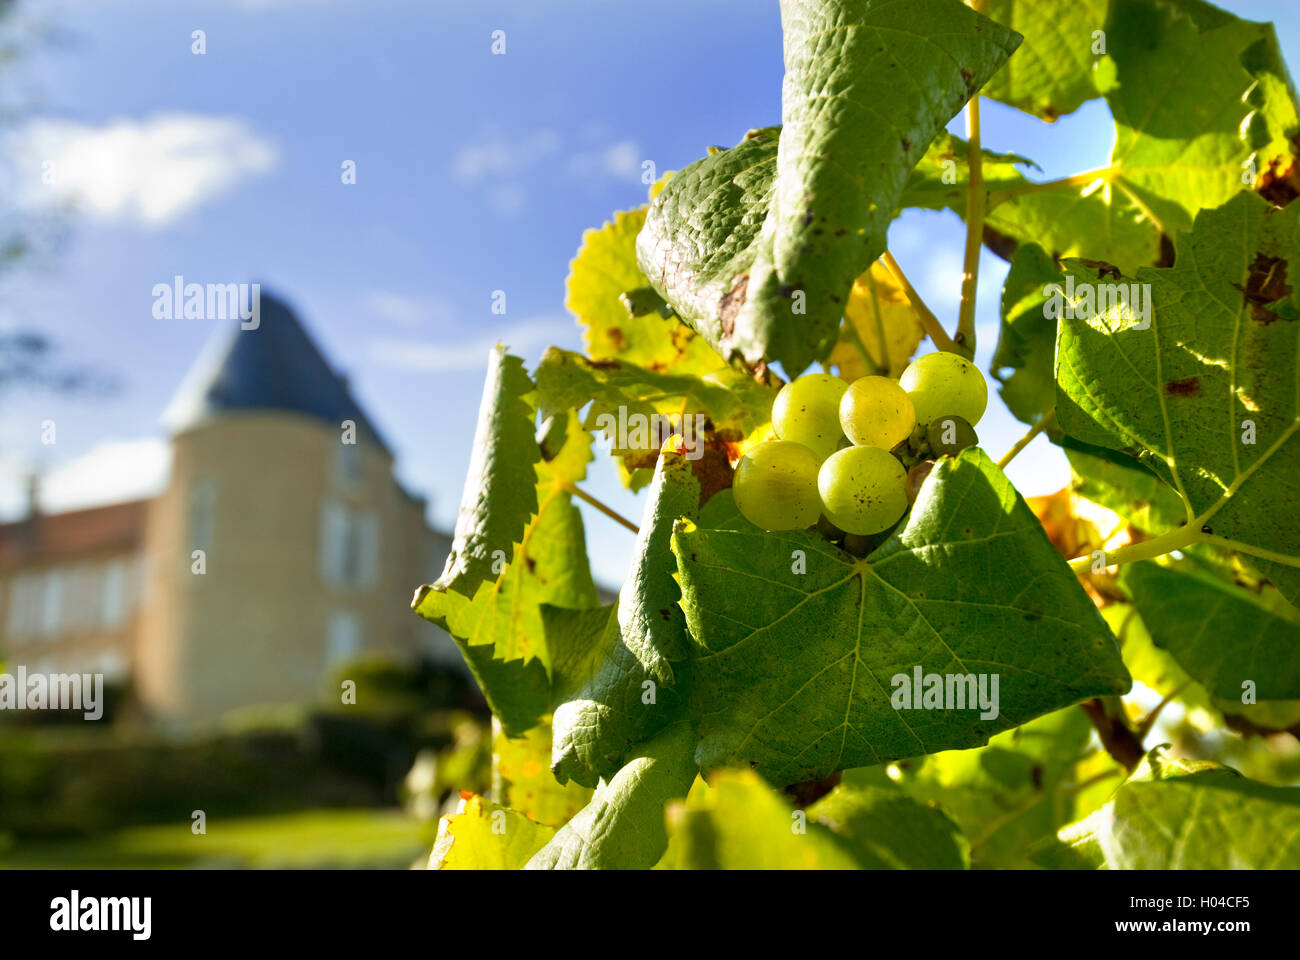 Close view on Semillon grapes in Chateau d'Yquem vineyard Sauternes Gironde France Stock Photo